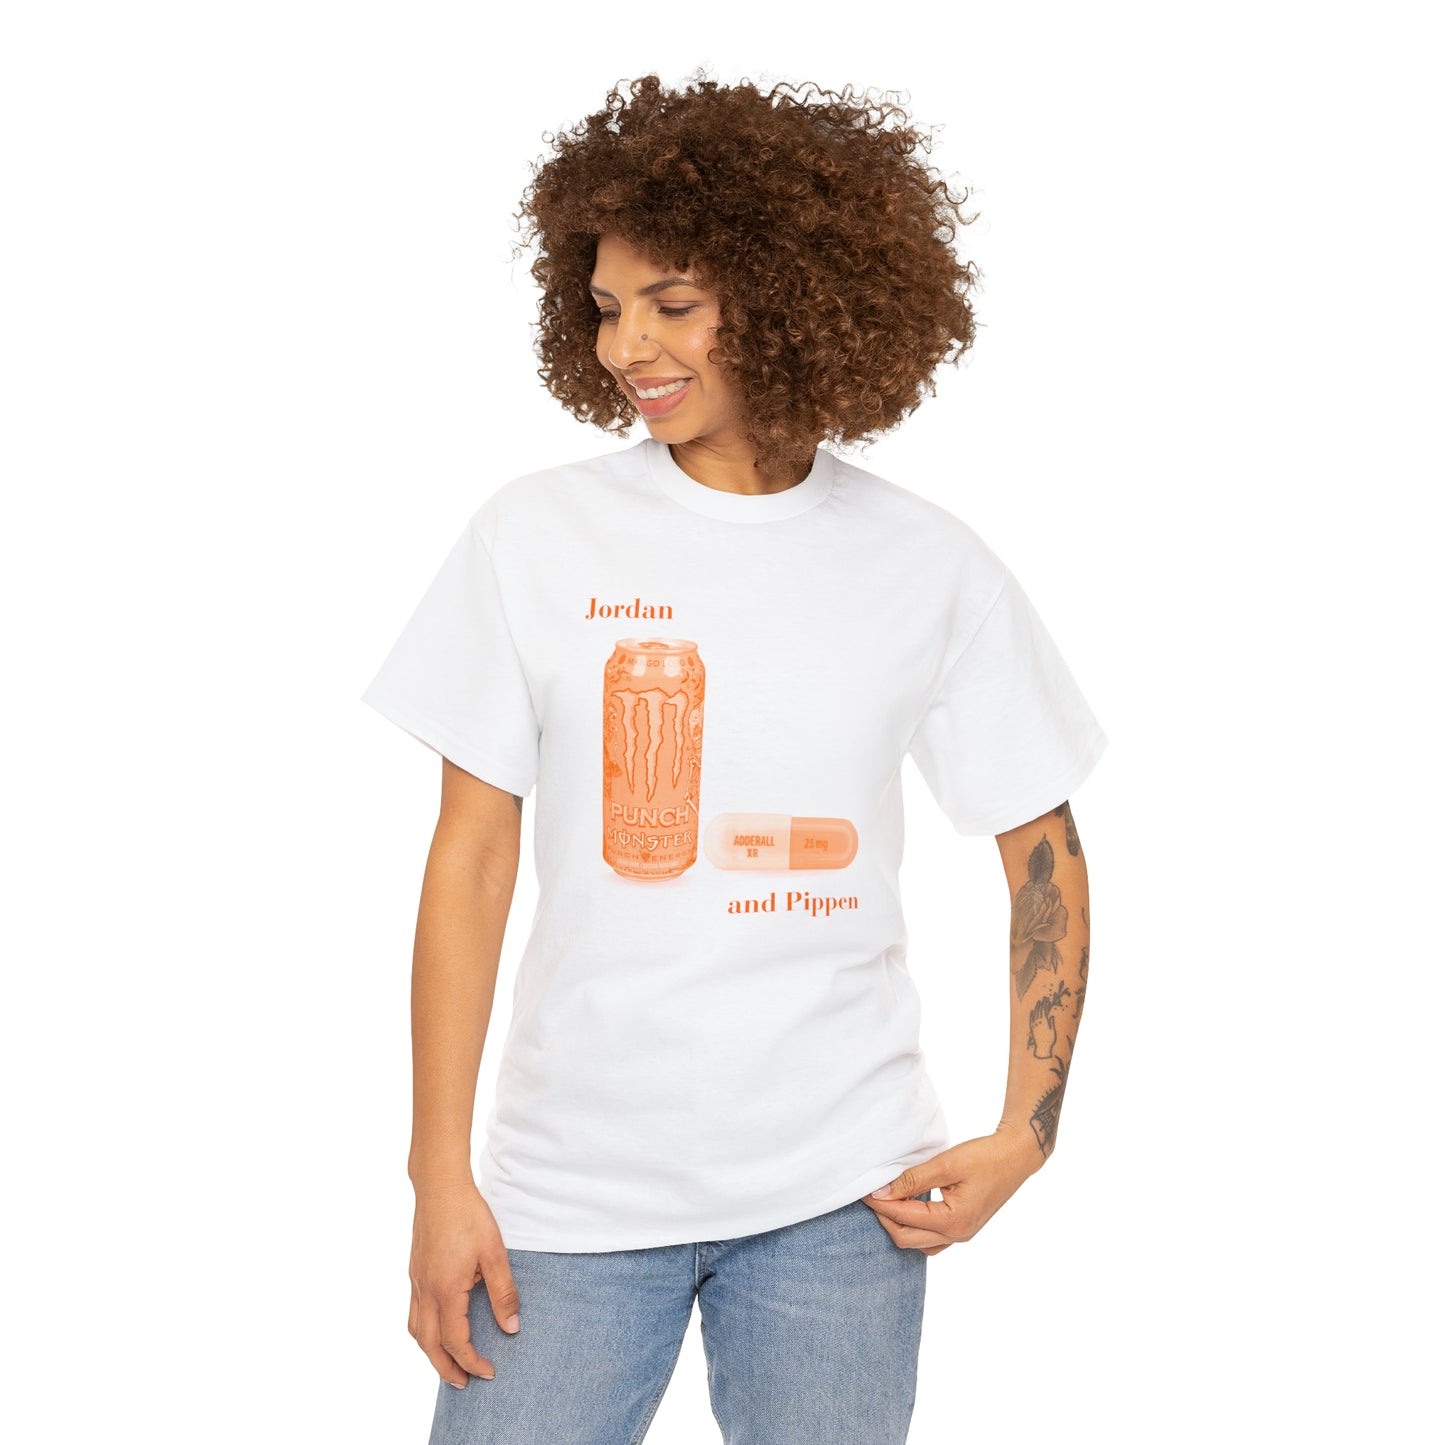 Jordan and Pippen Monster and Adderall - Unisex Heavy Cotton Tee